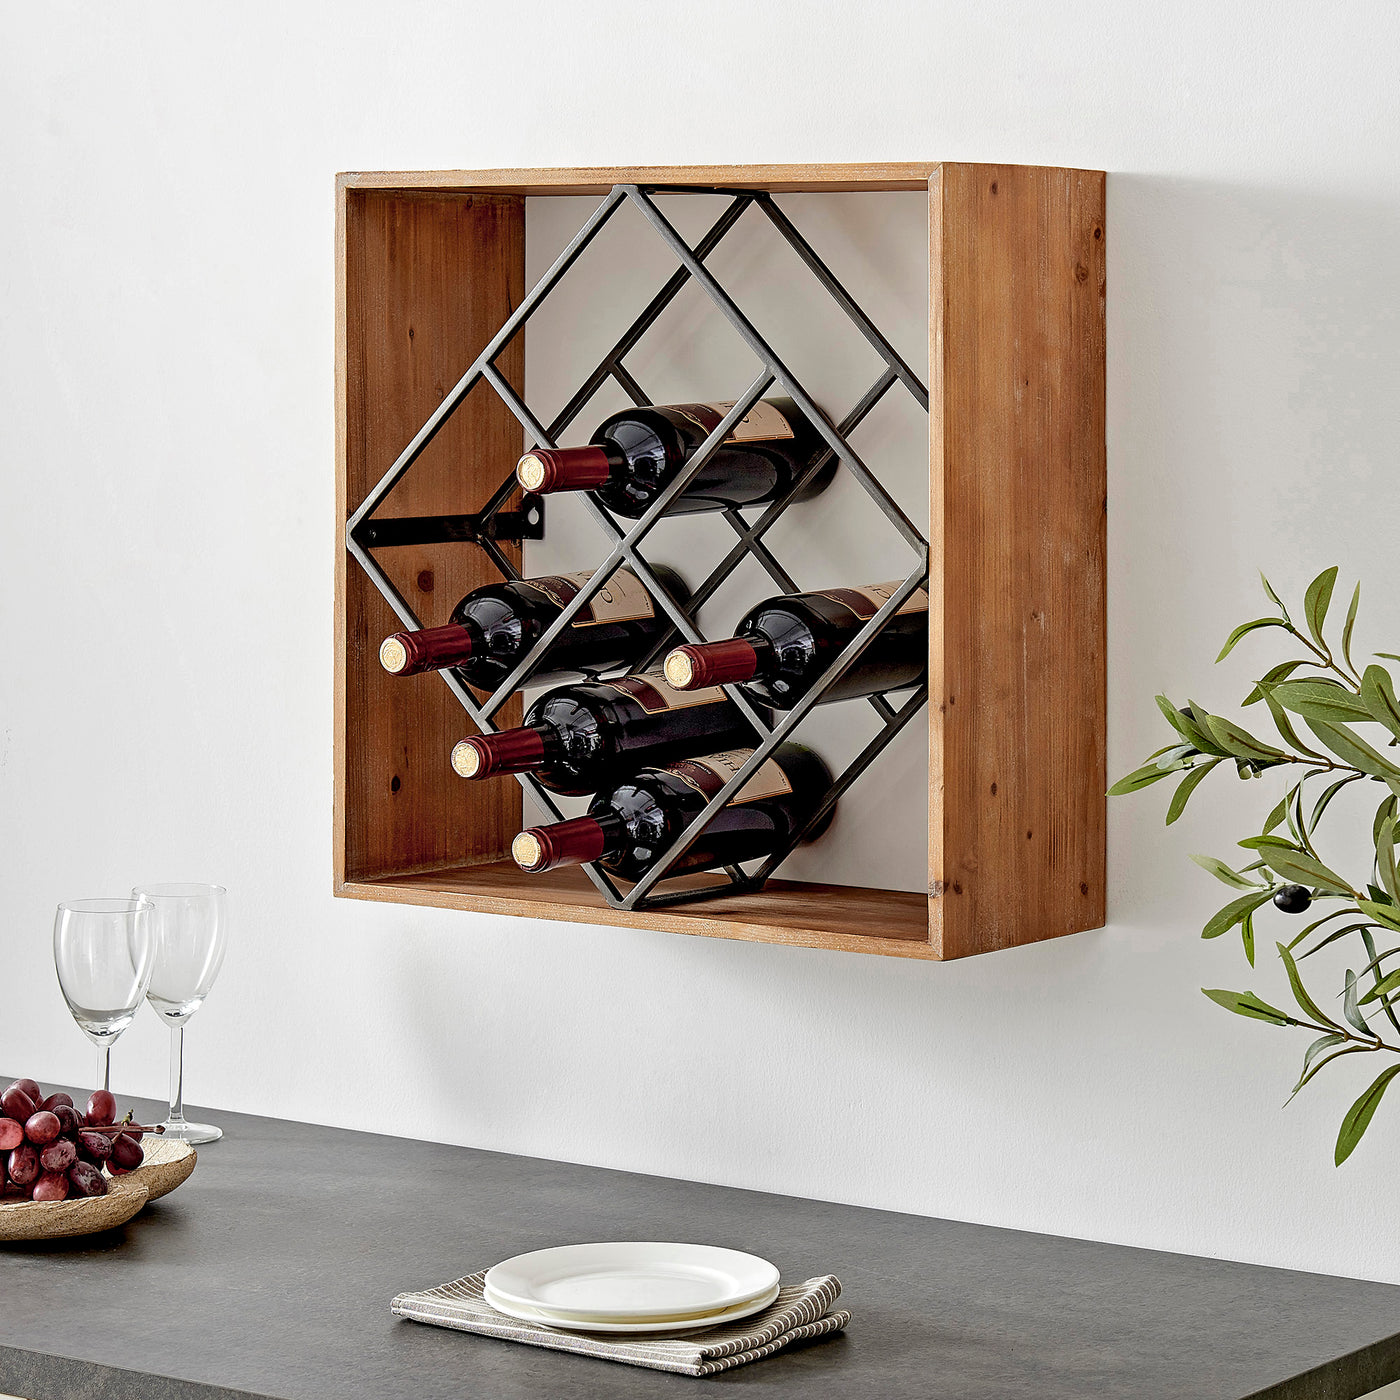 FirsTime & Co. Natural Winlock Wine Cube, Farmhouse Style, Made of Wood